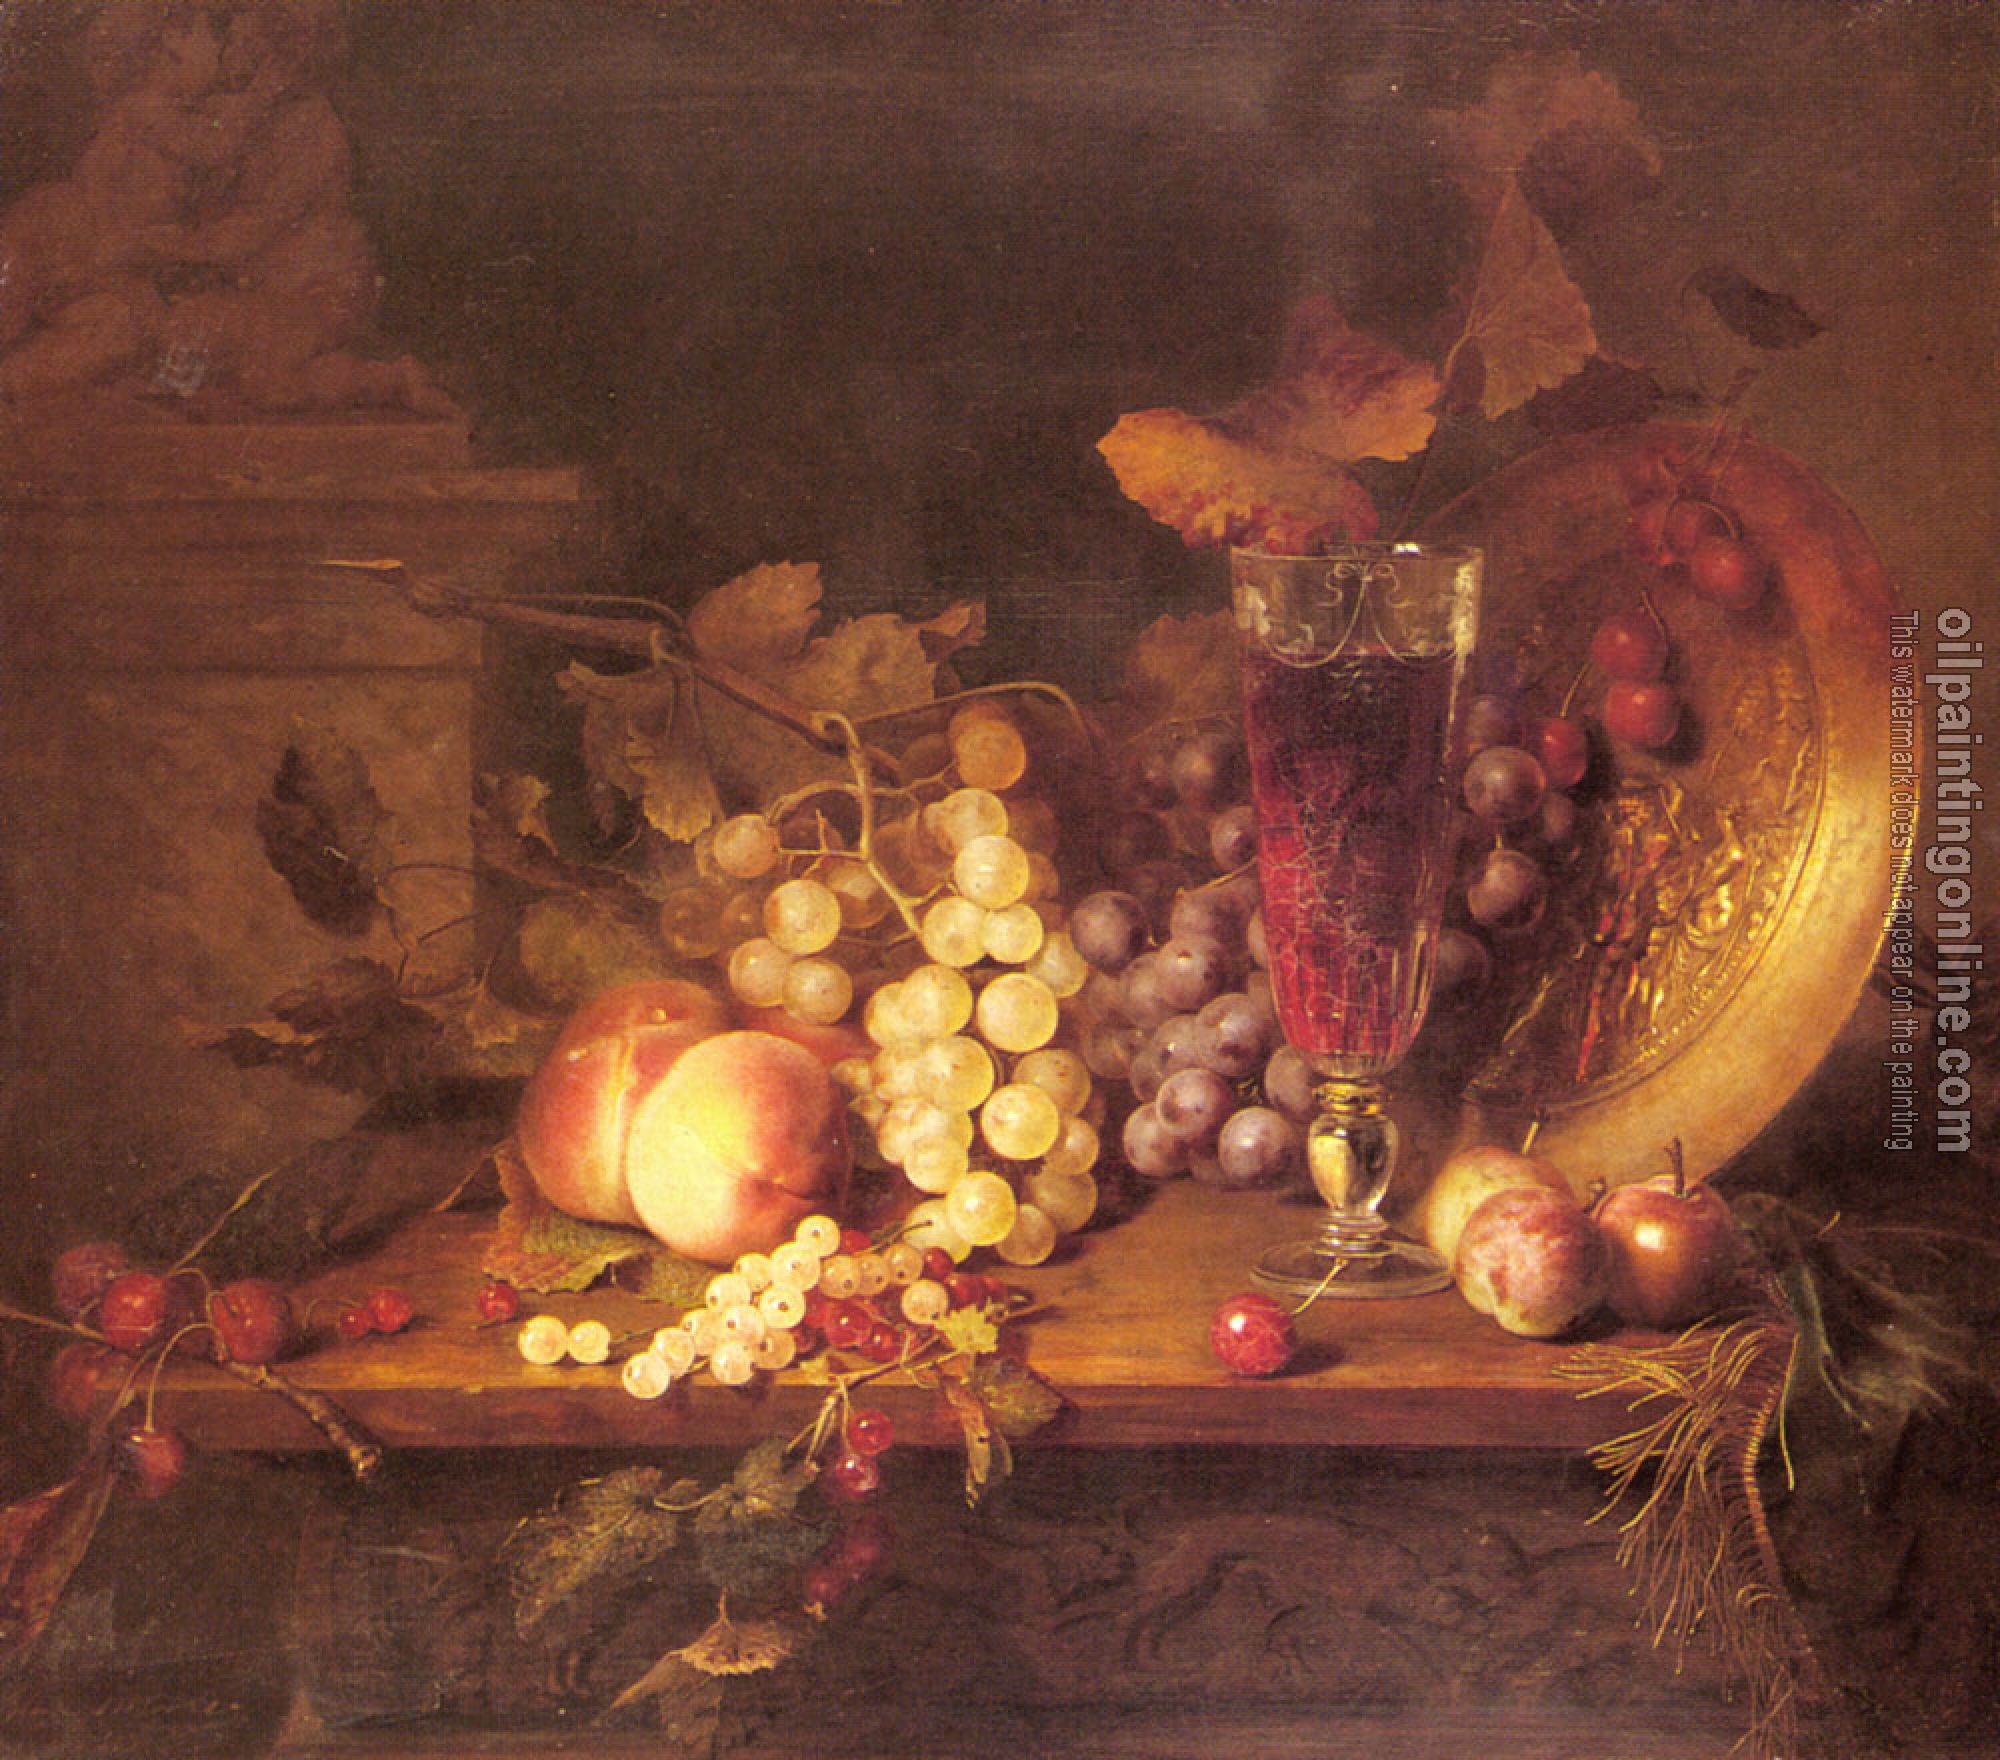 Desgoffe, Blaise Alexandre - Still Life with Fruit, a Glass of Wine and a Bronze Vessel